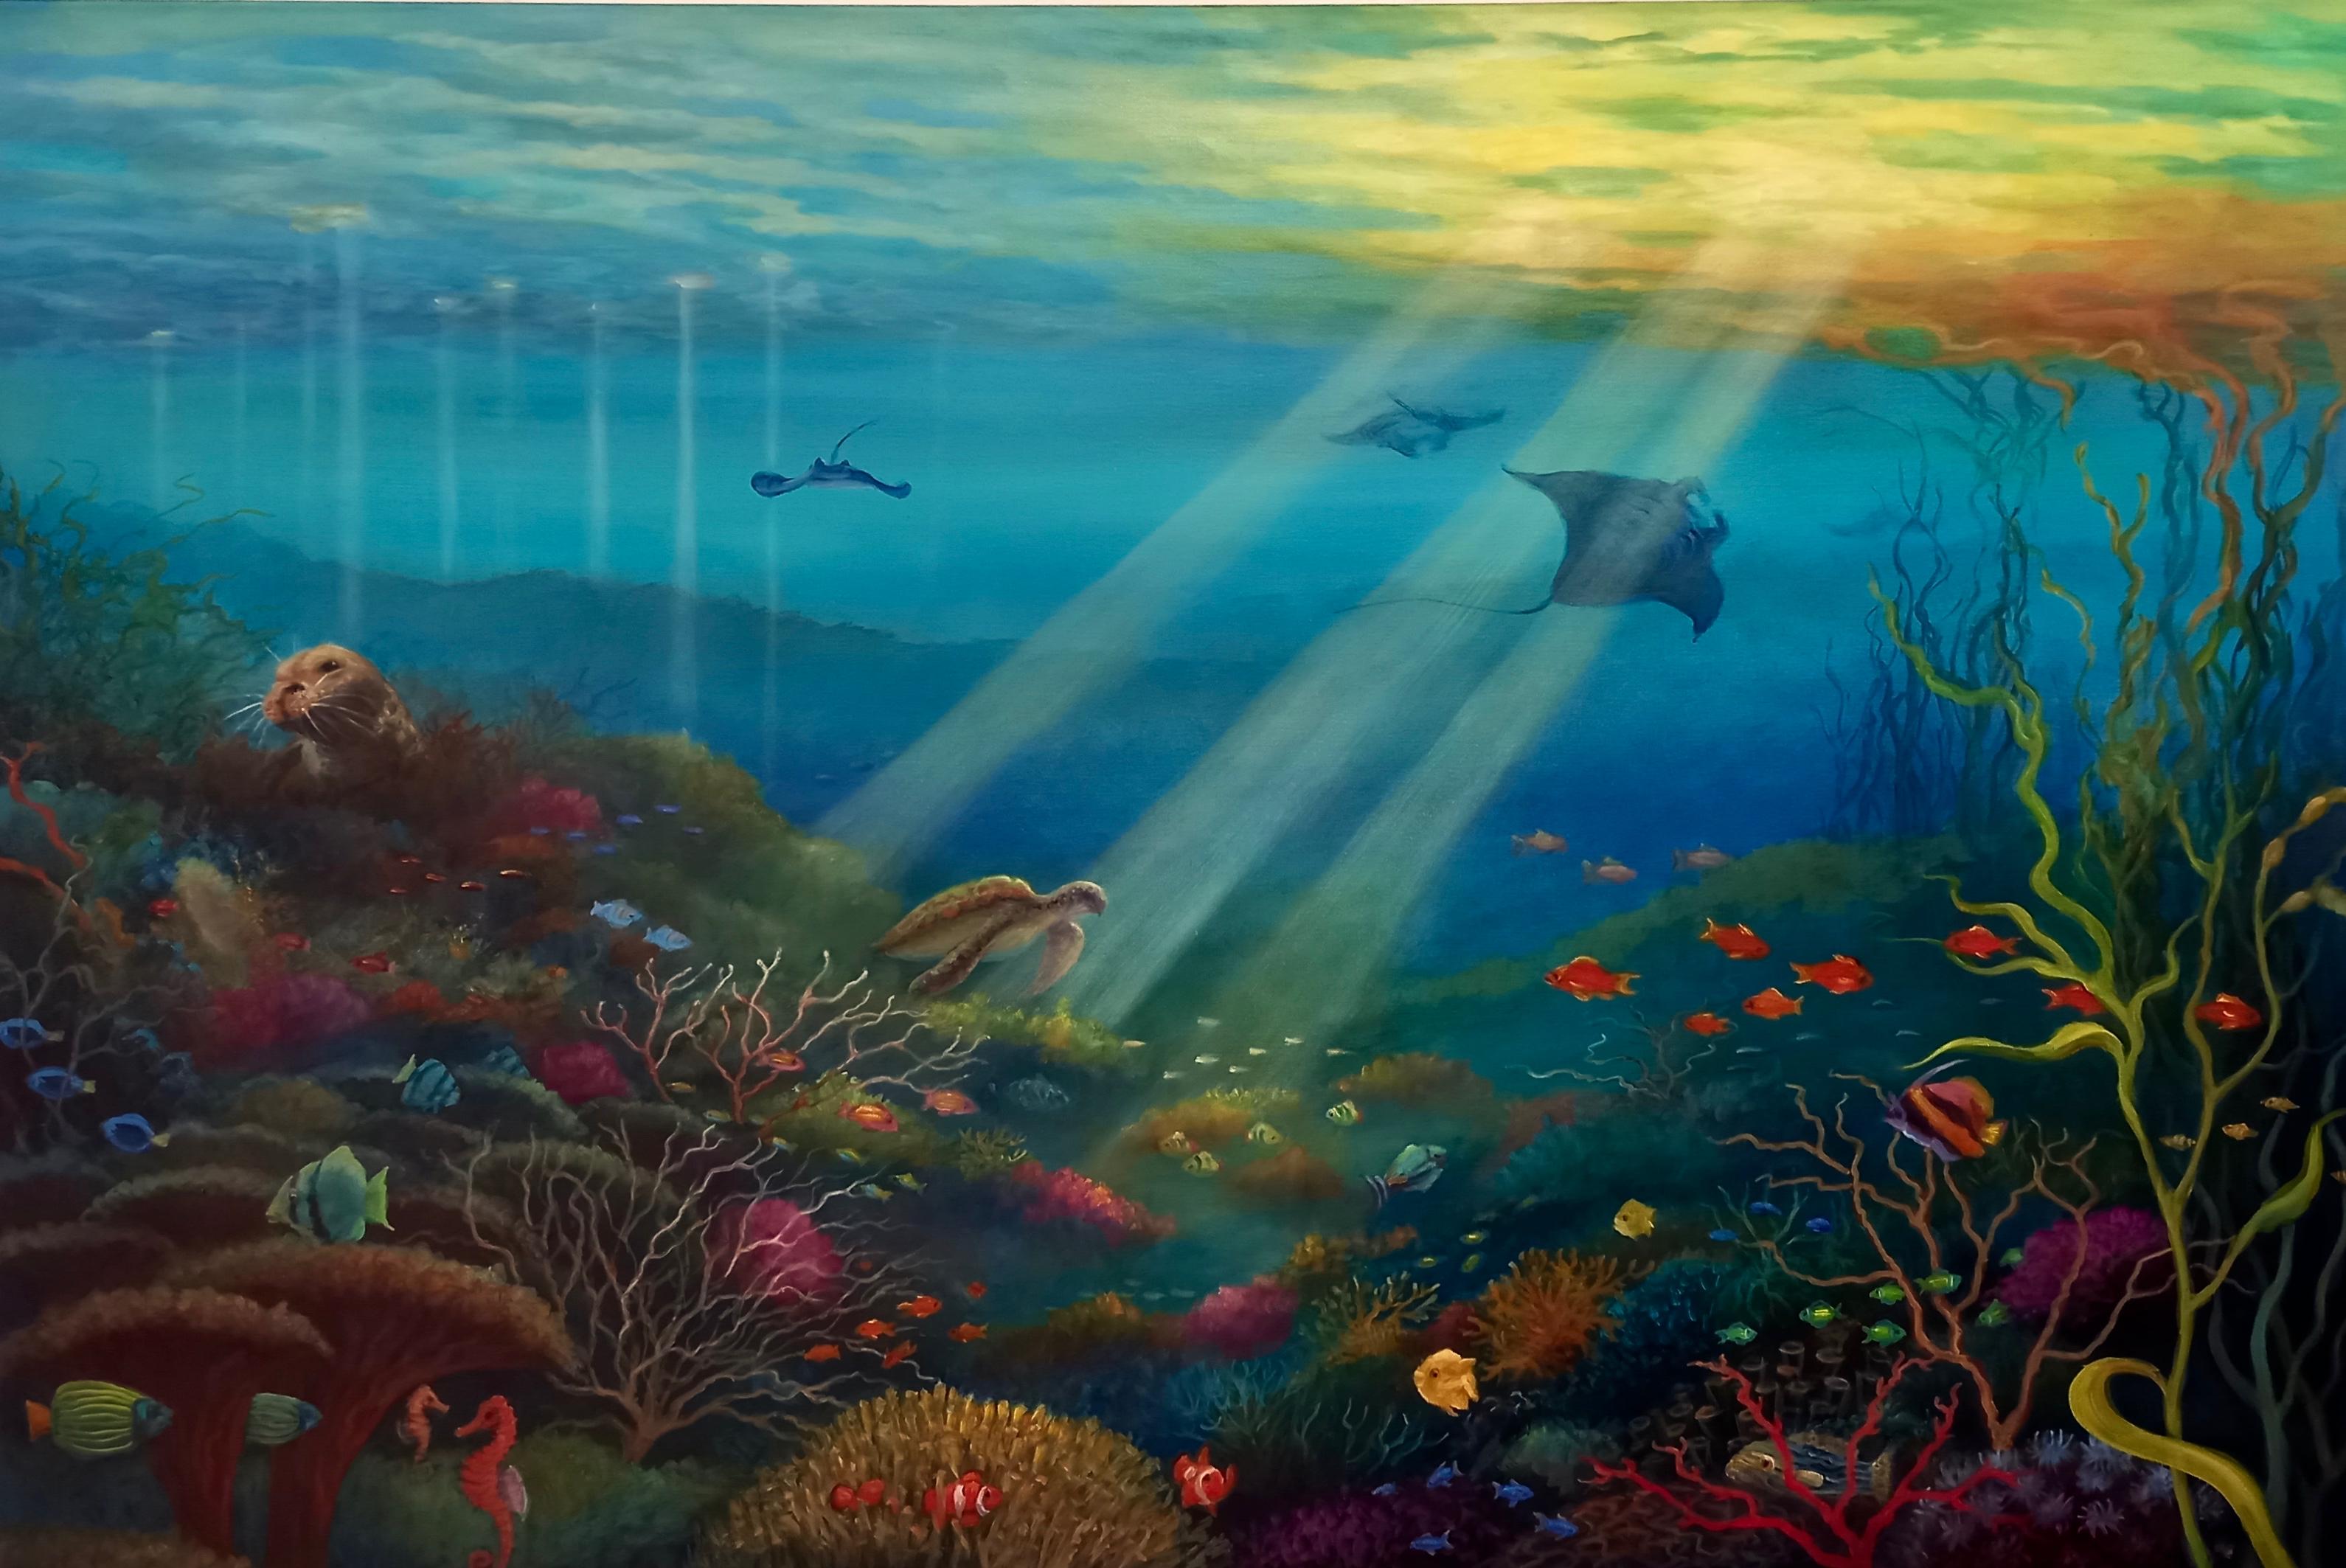 Pacific Rays
47.0 x 32.0 x 1.5, 7.0 lbs 
Oil Paint
Hand signed by artist 

Description:
An original oil painting by Lee Campbell. This contemporary painting depicts a tropical ocean scene filled with fish and sea animals. 

Artist's Commentary: